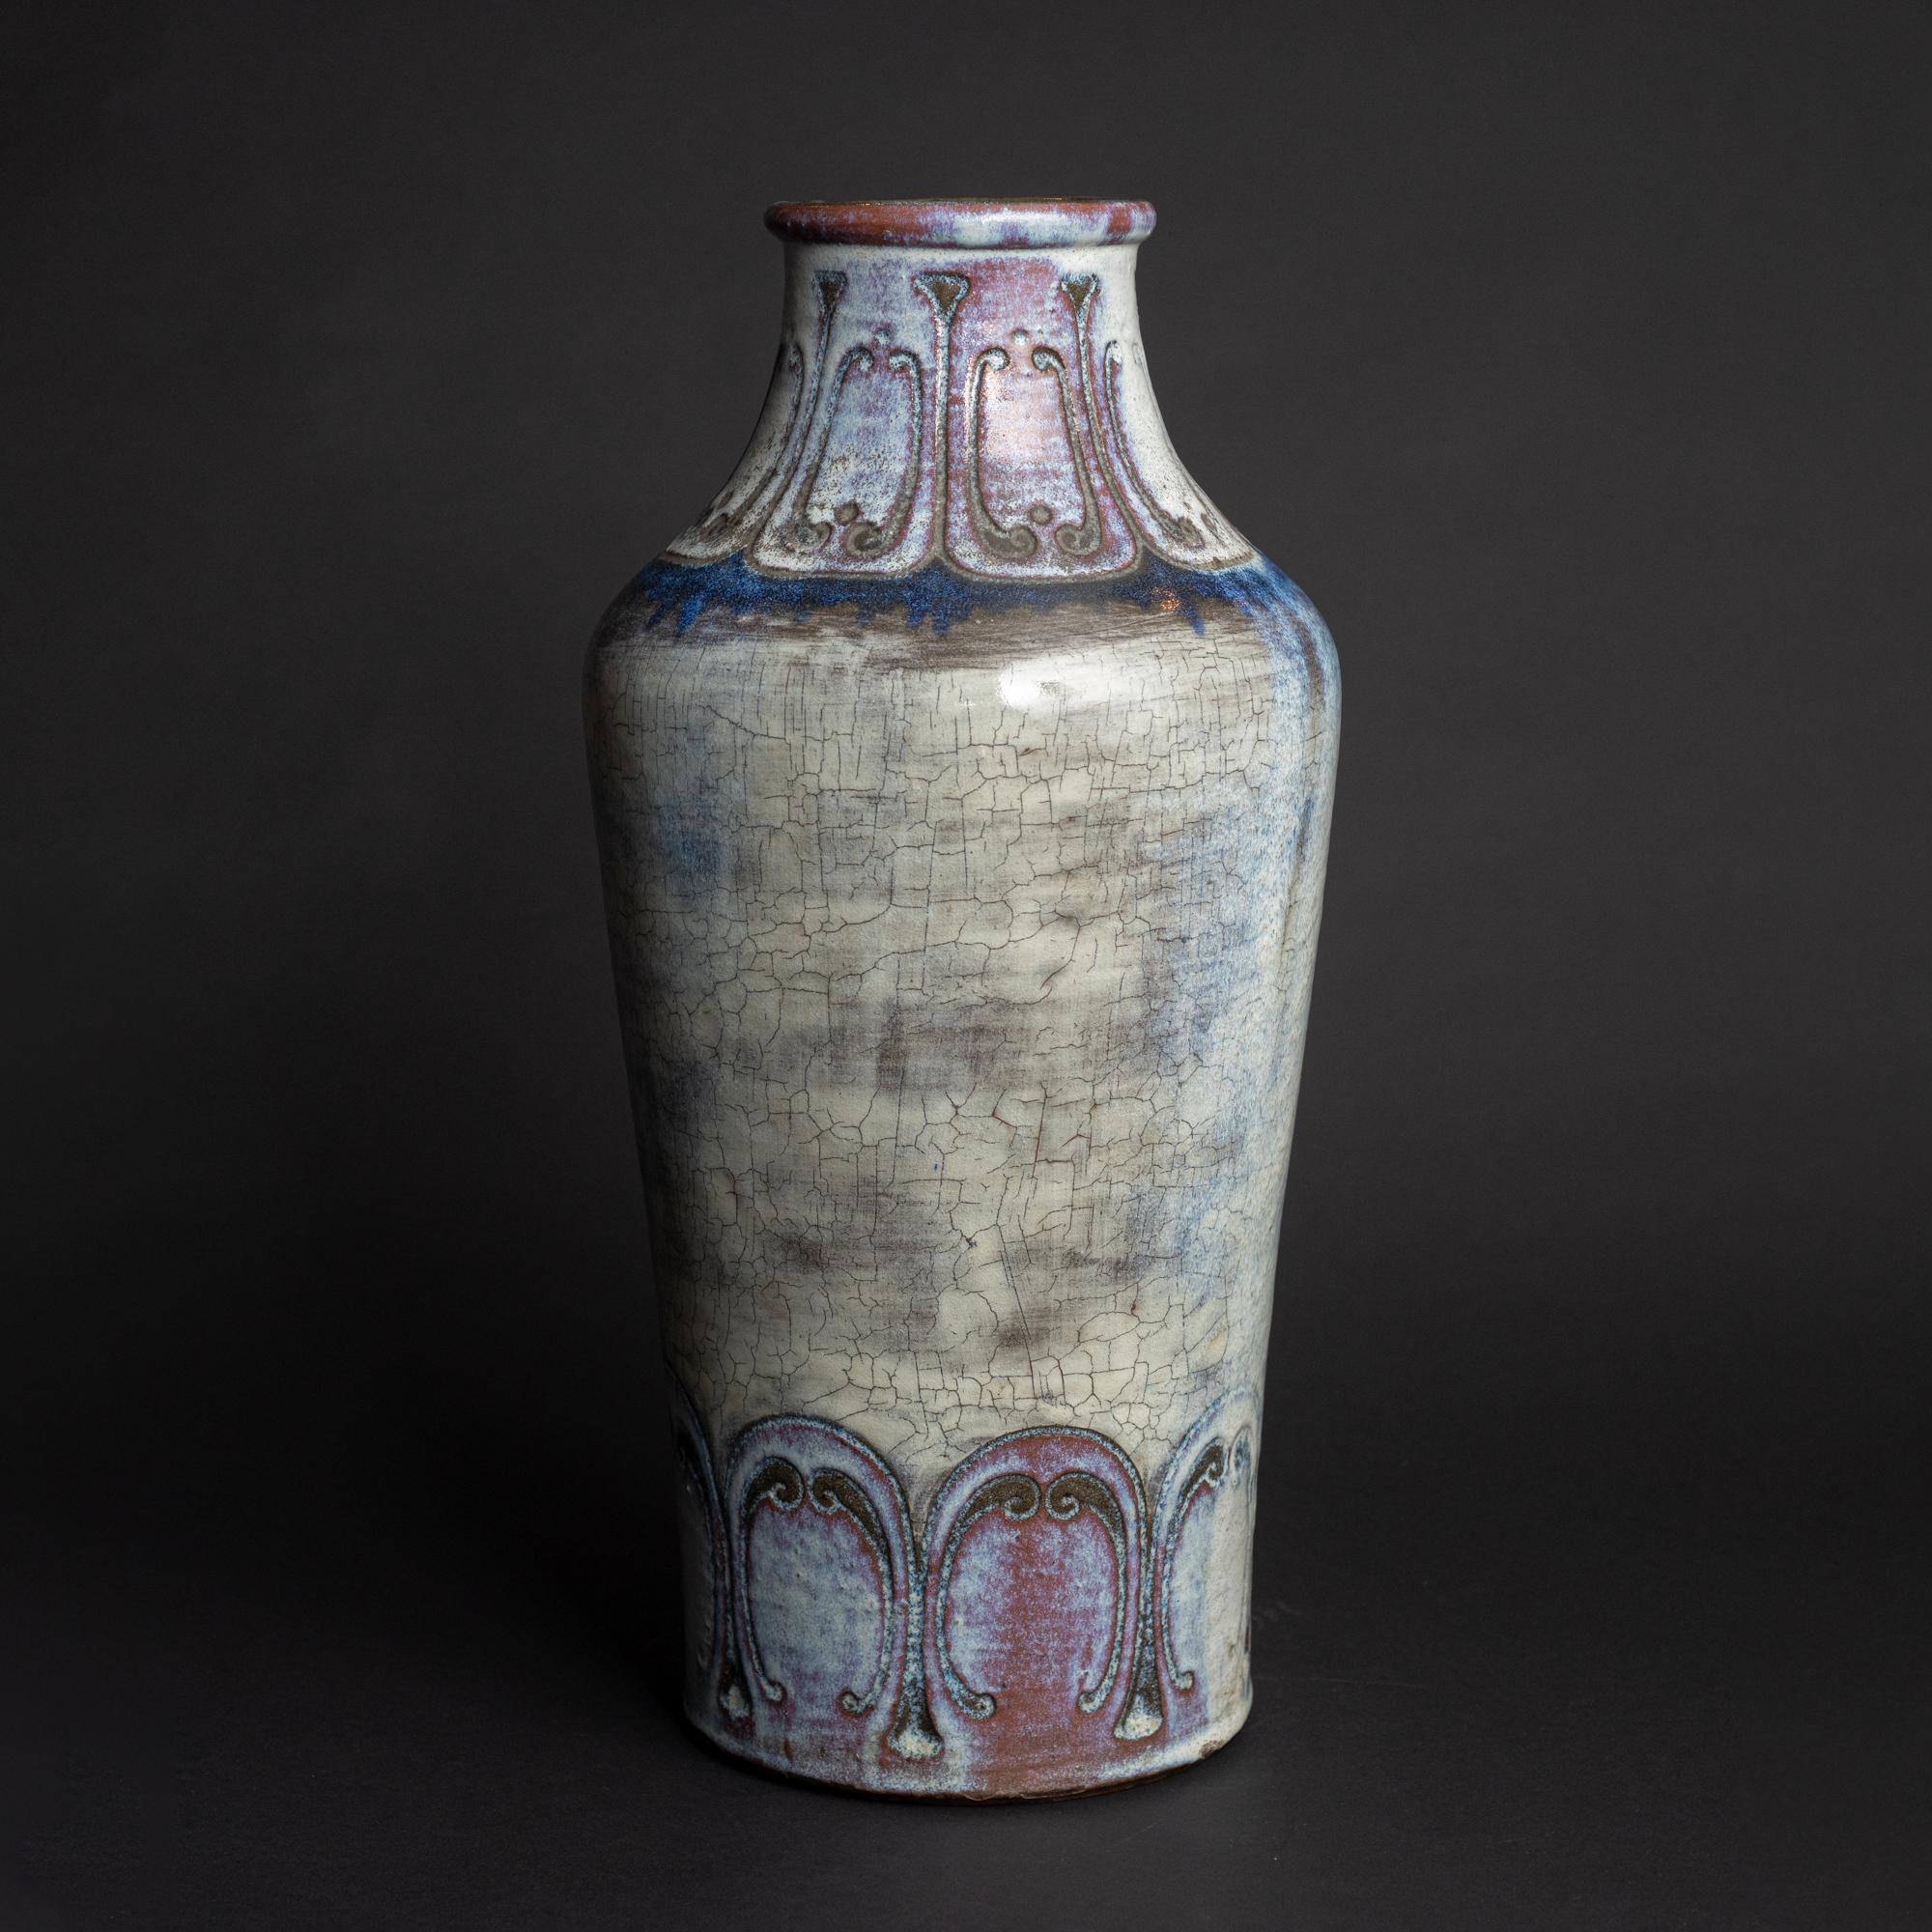 Model #1990. Auguste Delaherche turned the science of experimentation in ceramic ware into an art form. Coming from a long tradition of potters in the Beauvais region of France dating back to antiquity, Delaherche displayed a fascination and an